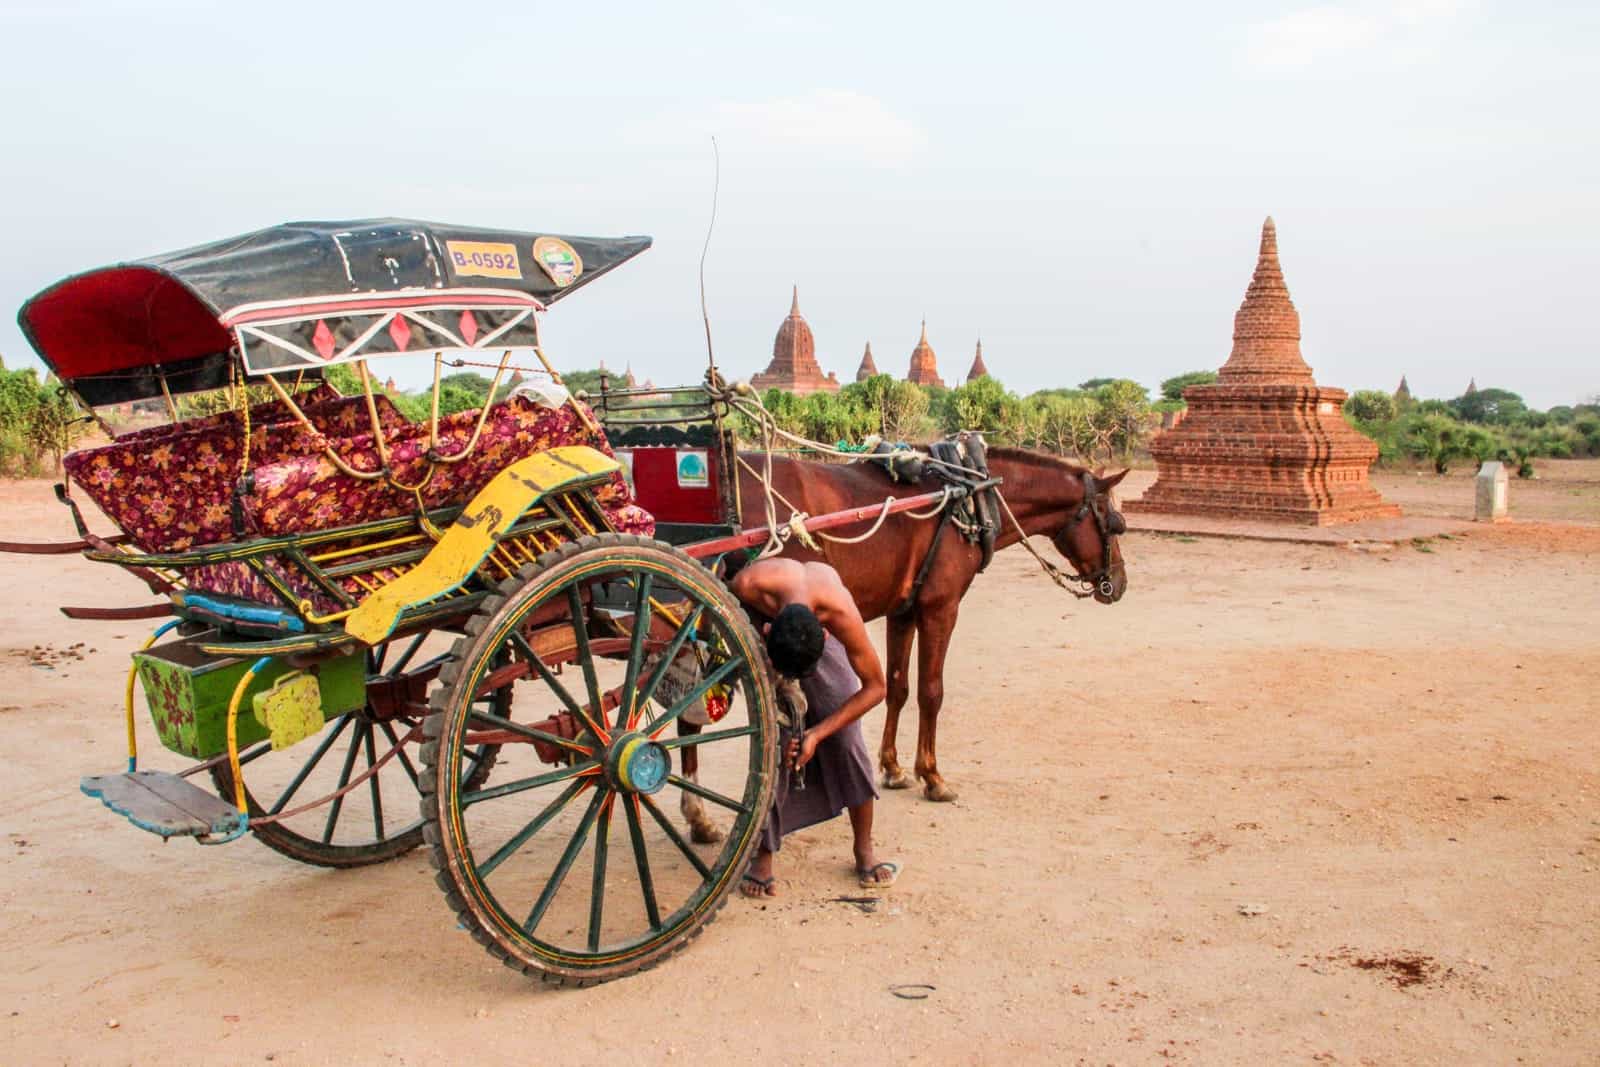 A topless, male horse and cart driver in a purple tunic skirt, bends down to fix the wheel of his red and yellow cart in Bagan, Myanmar. Five golden brown temples can be seen behind him. 